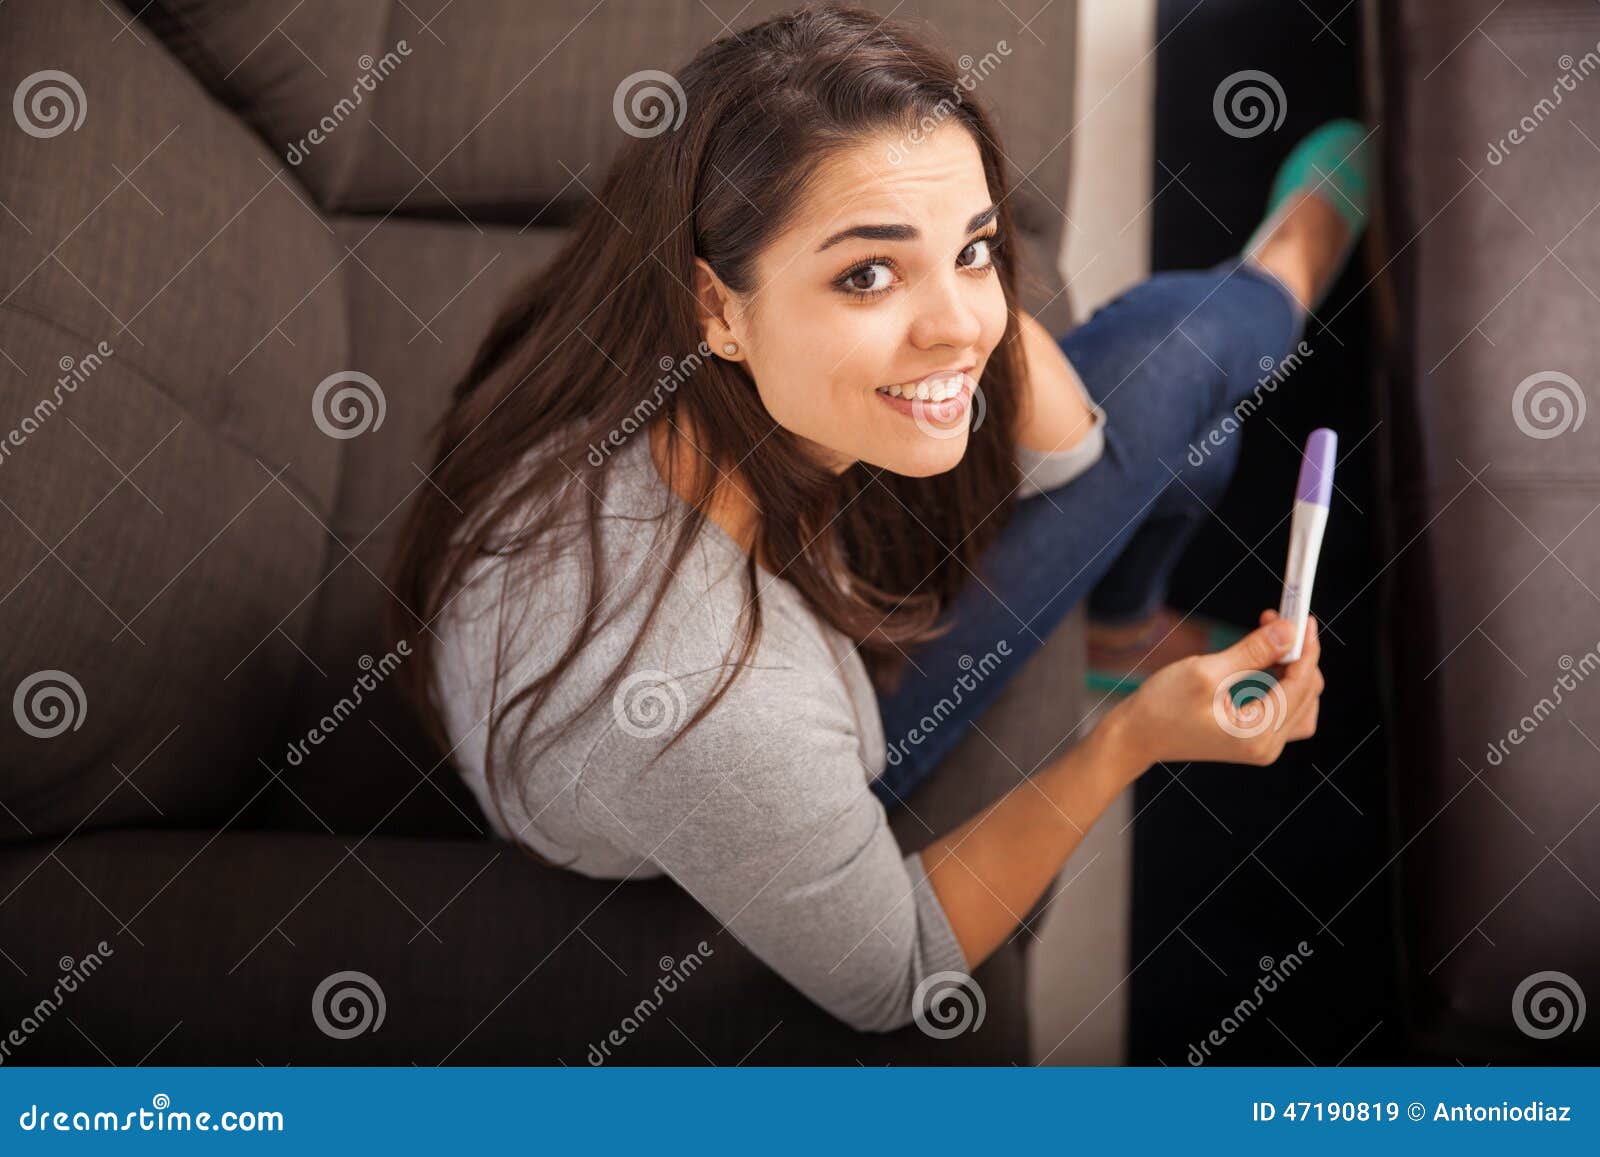 Very Excited Mom To Be Stock Image Image Of Adult Good 47190819 